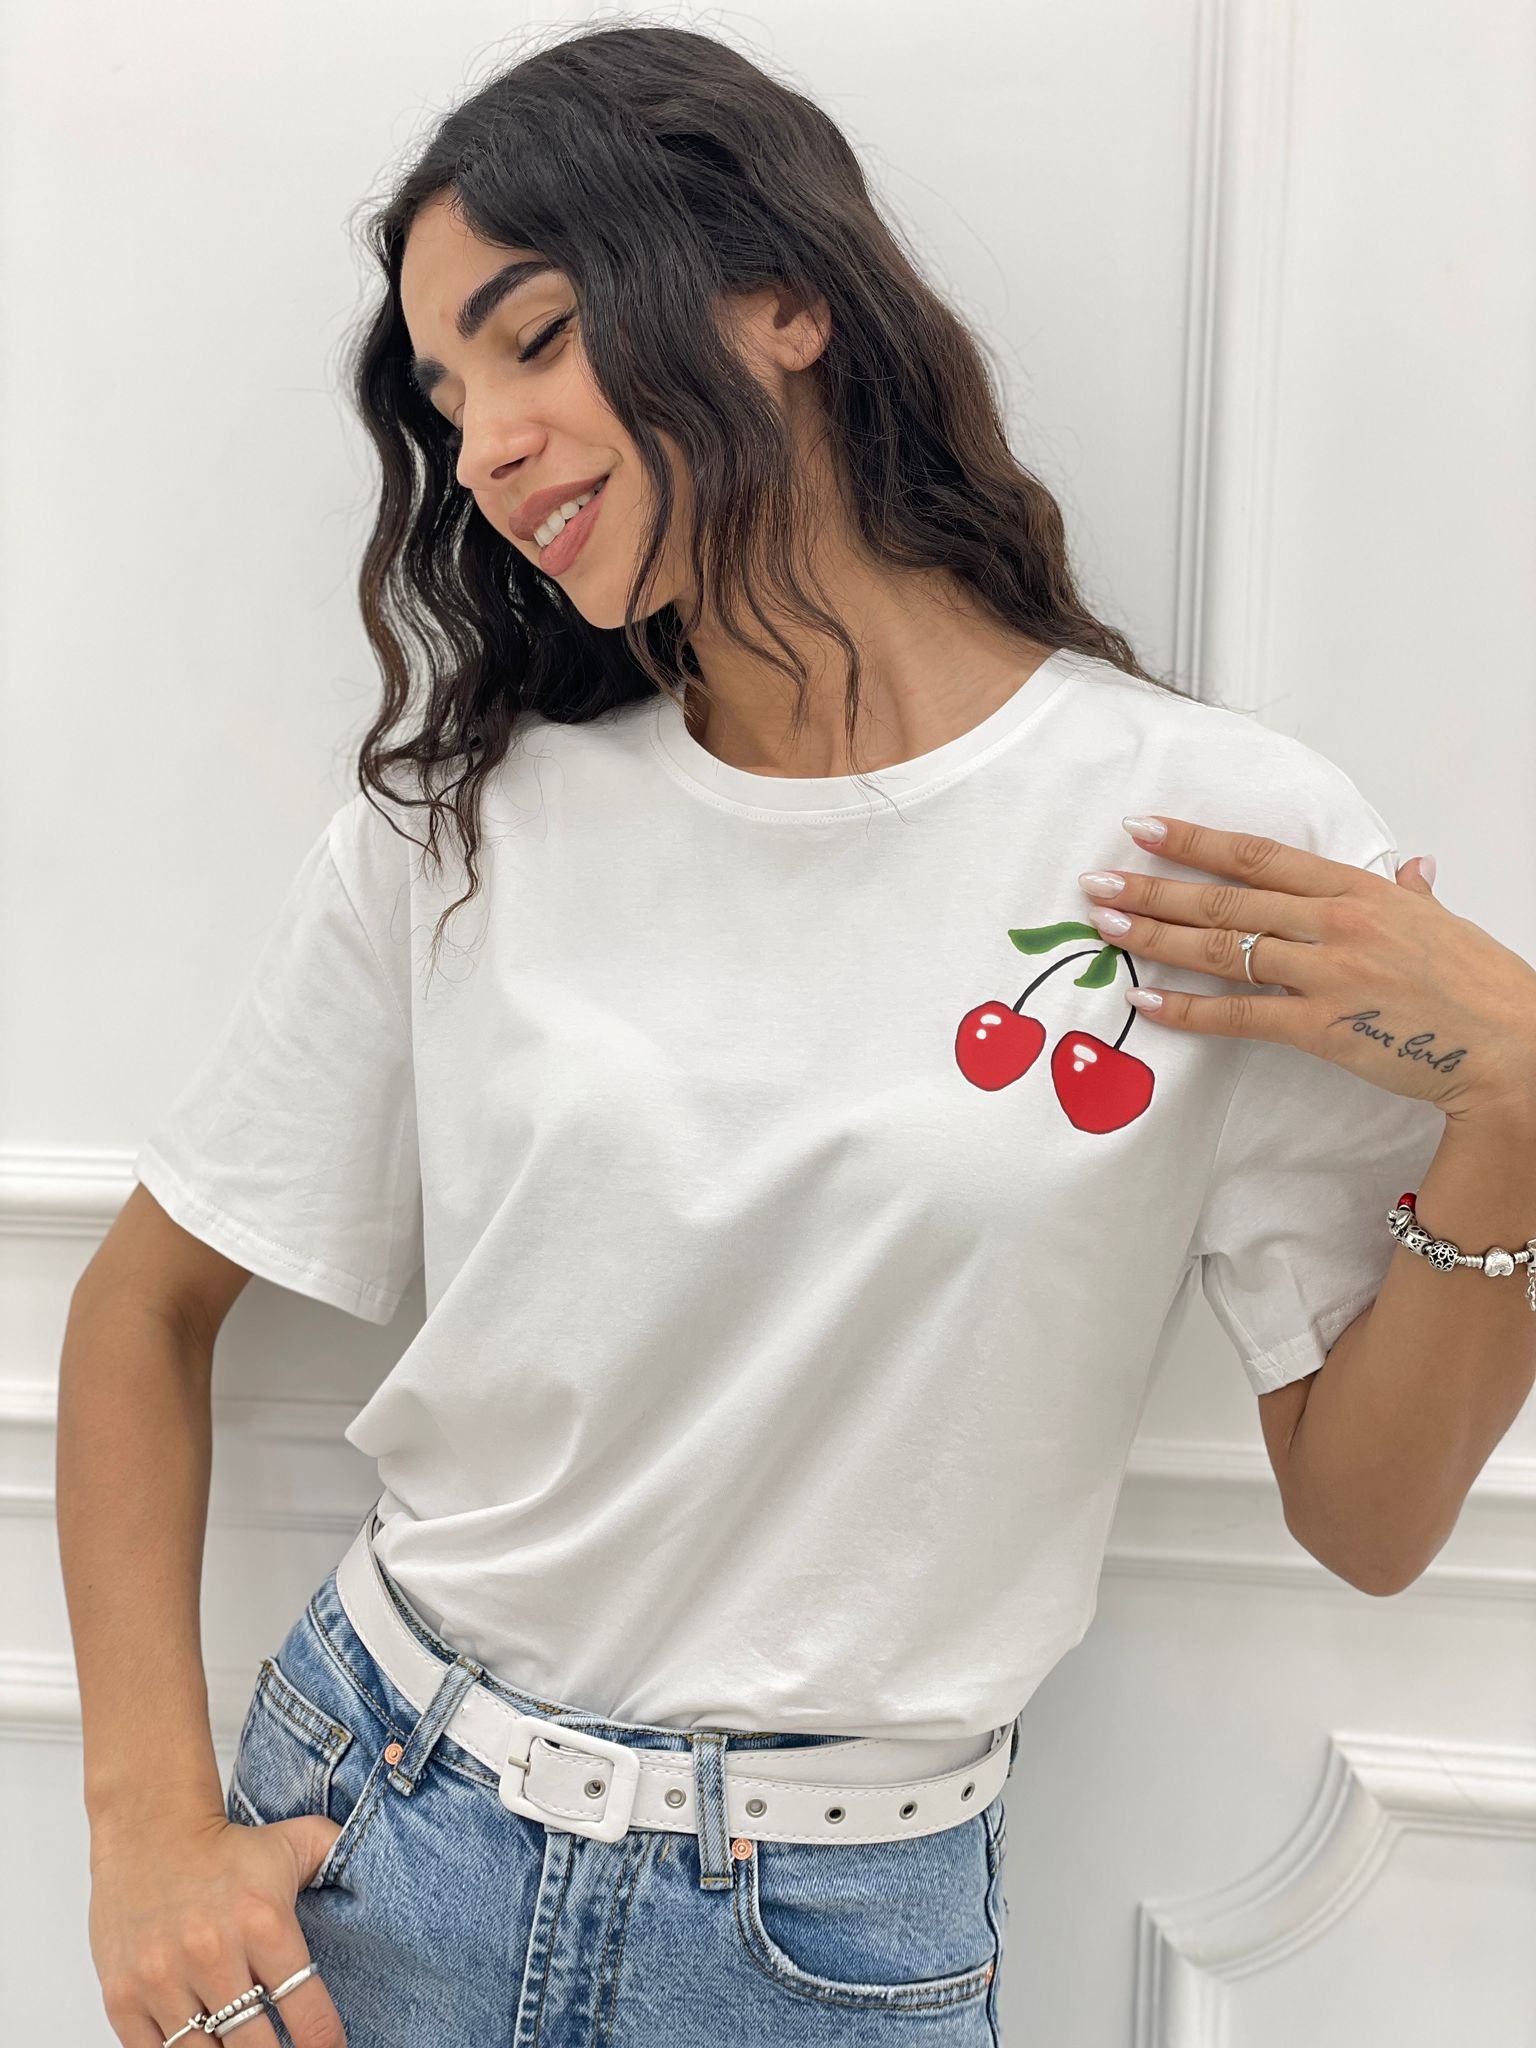 68573-T-SHIRT-STAMPA-CHERRY-NEW-COLLECTION-T-SHIRT-STAMPA-CHERRY-NEW-COLLECTION.jpg